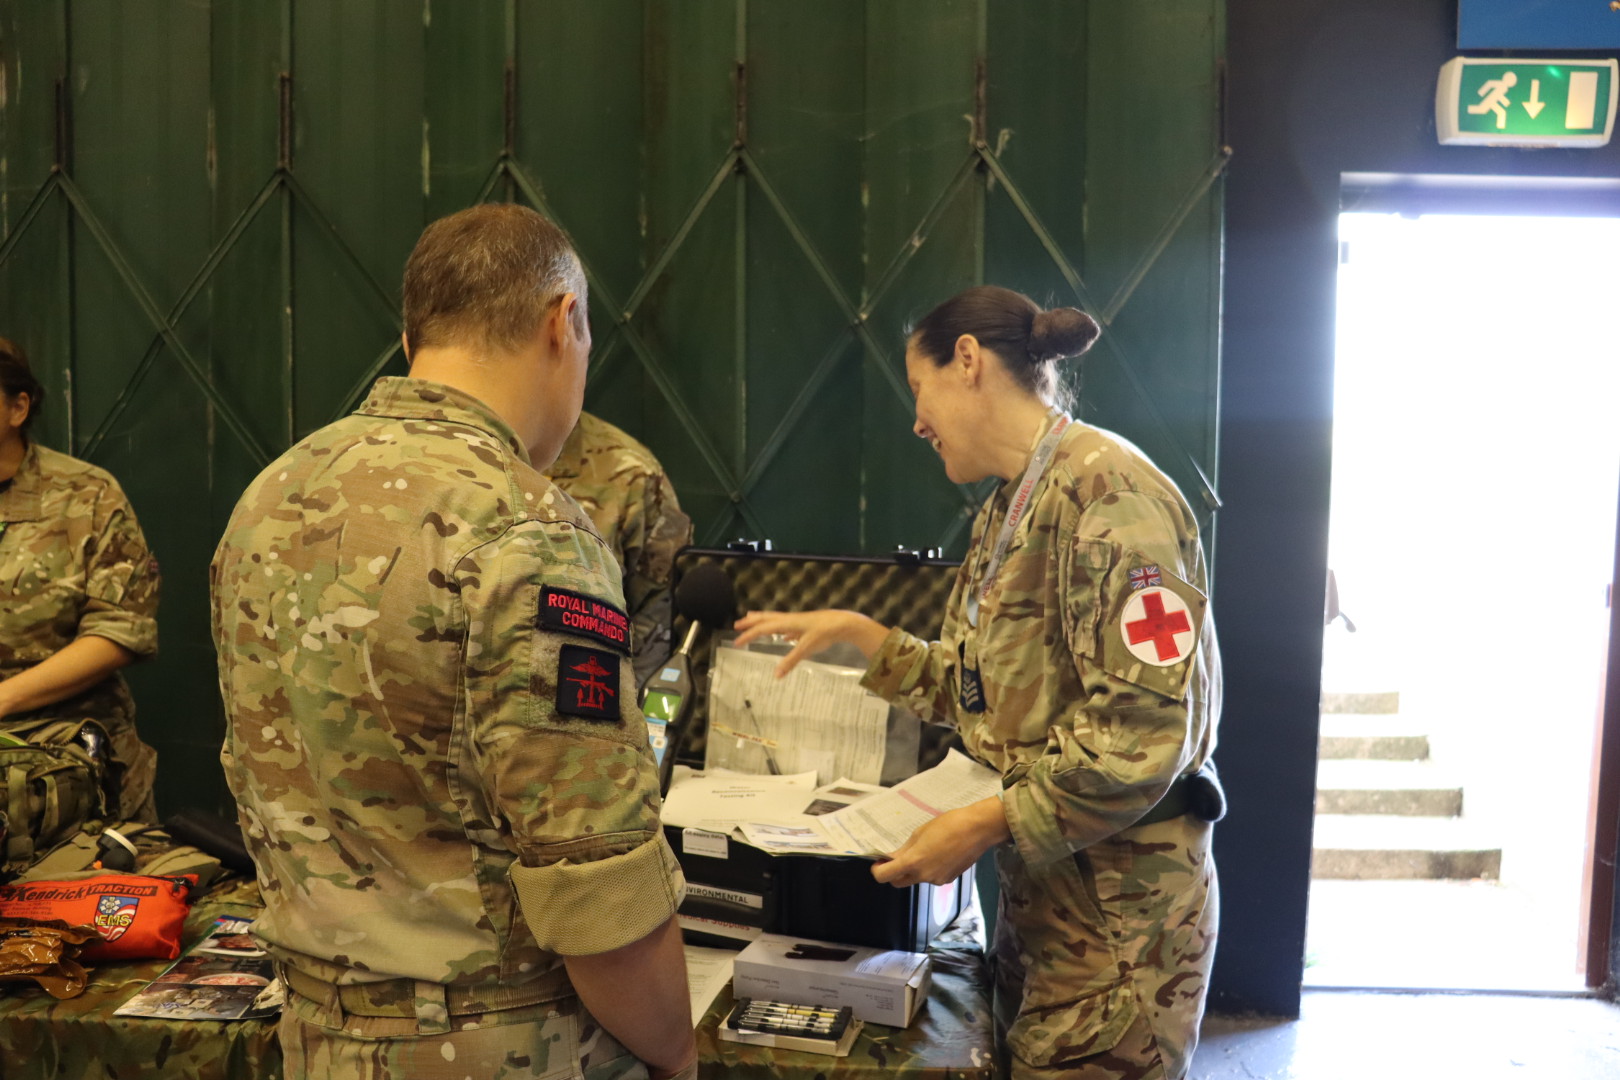 RAF medic showing the kit used on deployment